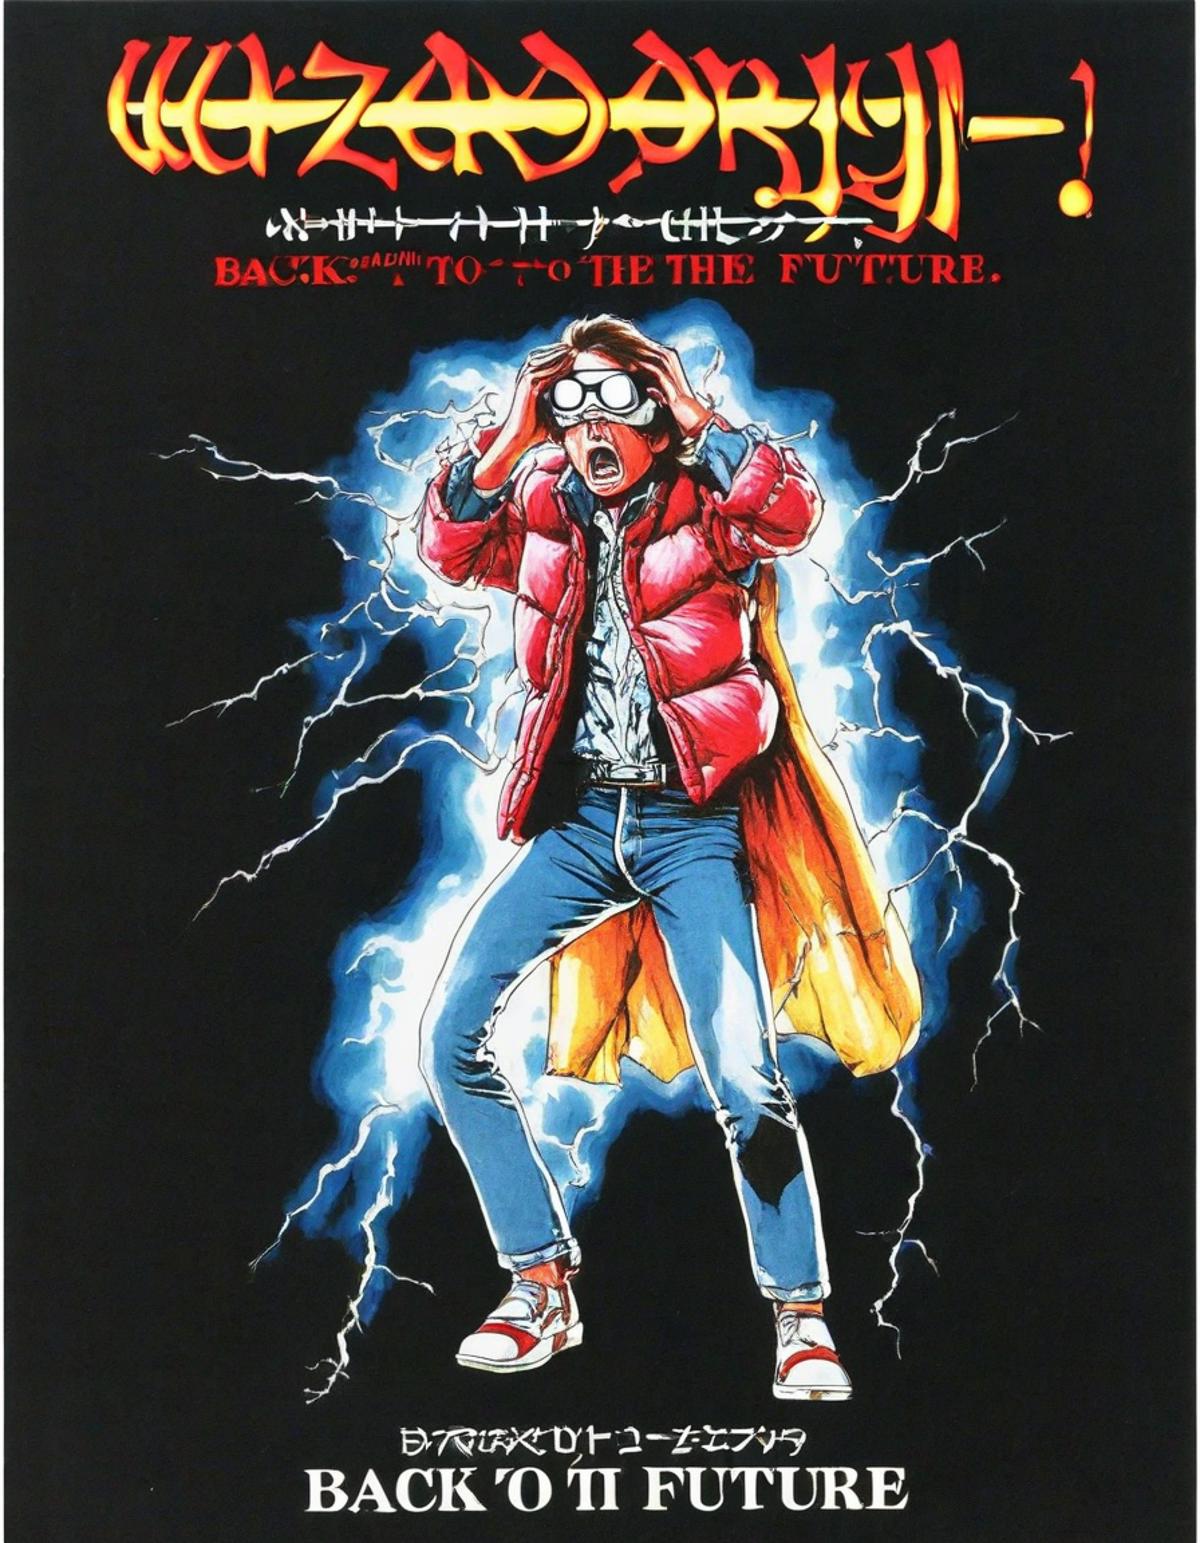 A man in a red coat and jeans with lightning behind him.